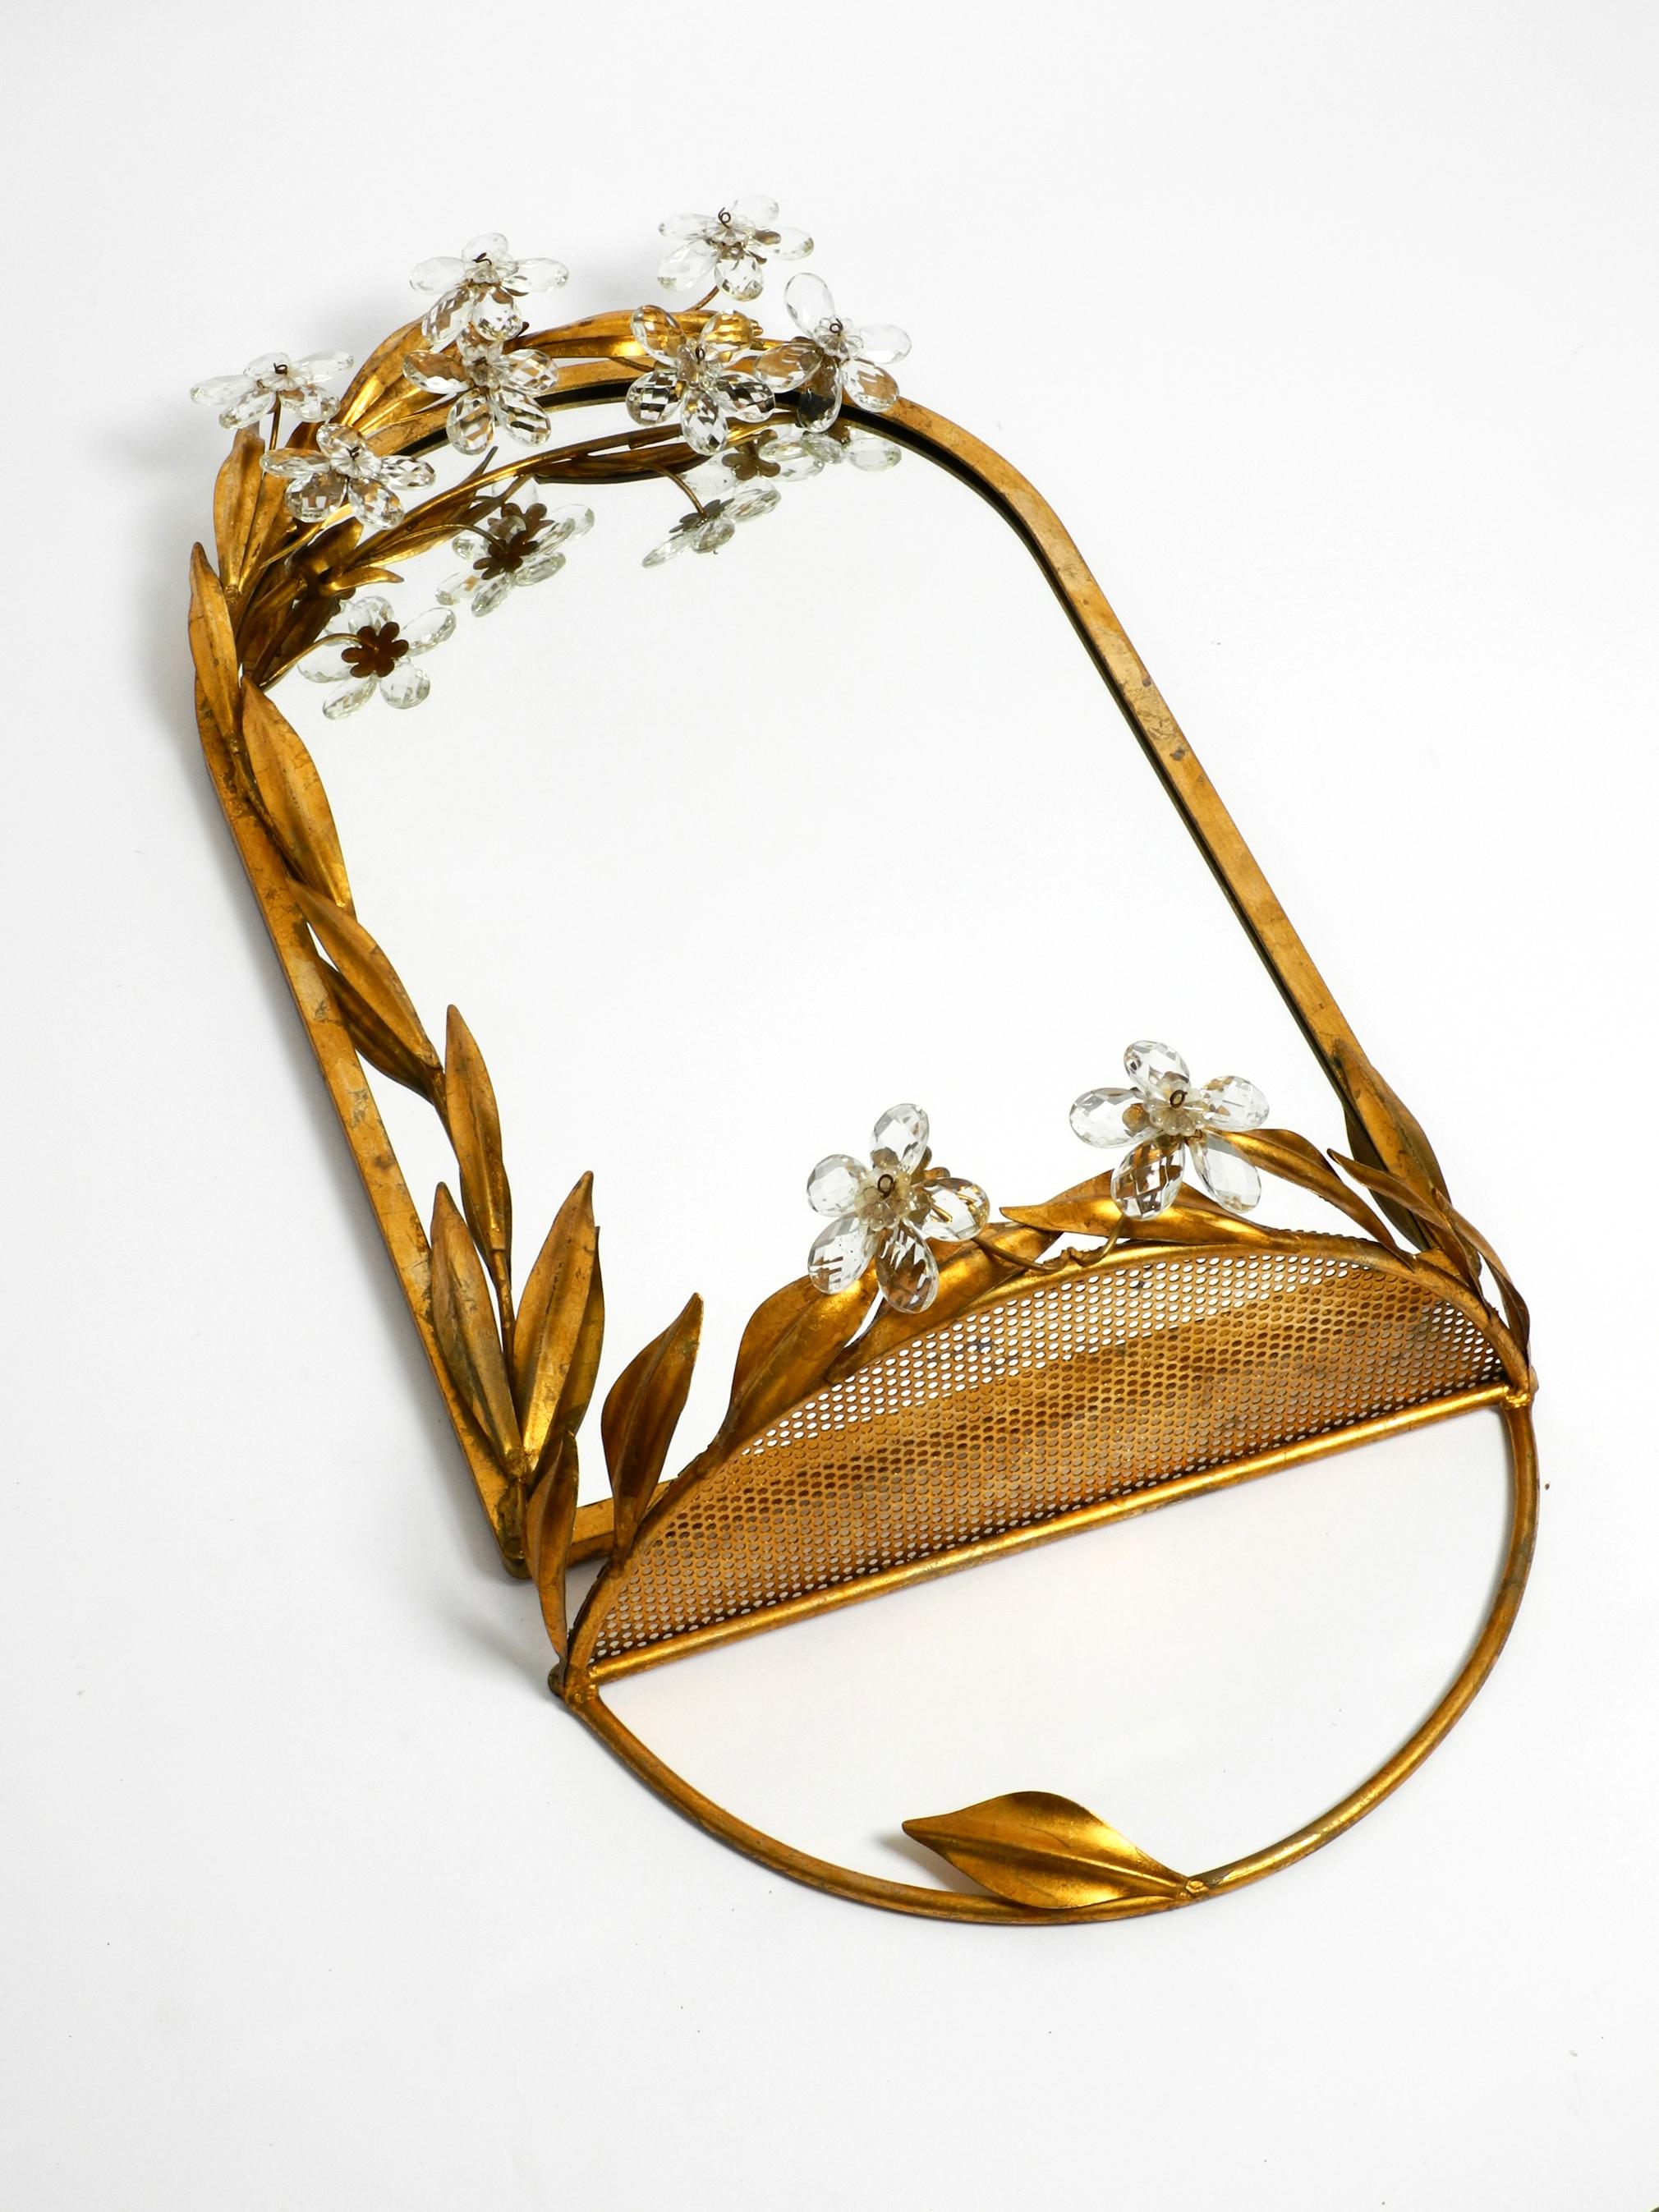 Beautiful, rare original 1960s floral iron wall mirror with shelf, gold-plated.
Many details with glass leaves and flowers on the mirror above and on the shelf.
Manufactured by Banci Firenze in the 1960s. Made in Italy.
Elaborate production with